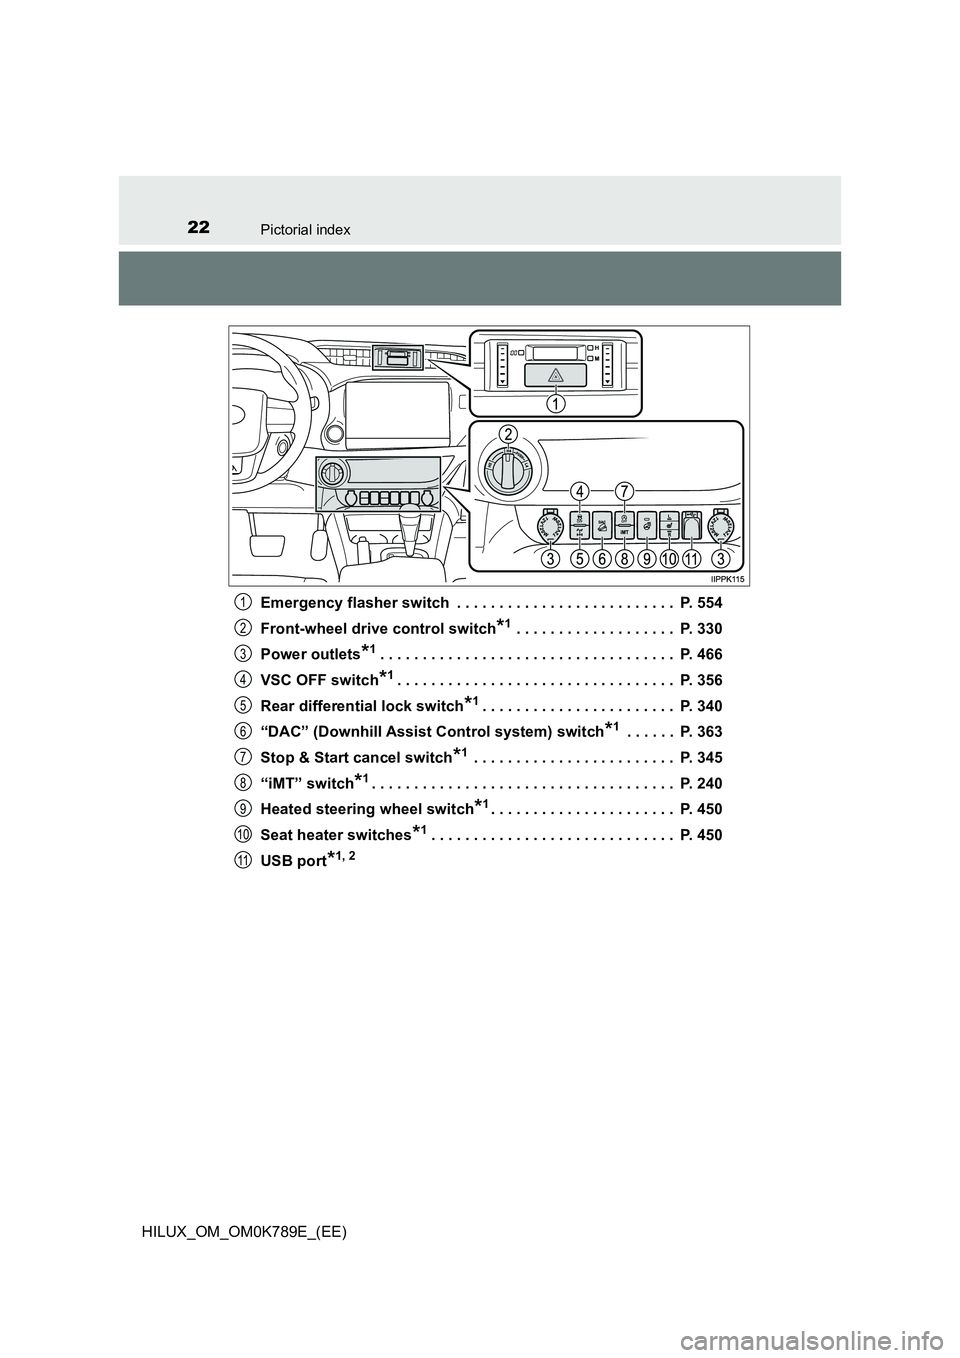 TOYOTA HILUX 2023 Owners Manual 22Pictorial index
HILUX_OM_OM0K789E_(EE) 
Emergency flasher switch  . . . . . . . . . . . . . . . . . . . . . . . . . .  P. 554 
Front-wheel drive control switch*1 . . . . . . . . . . . . . . . . . . 